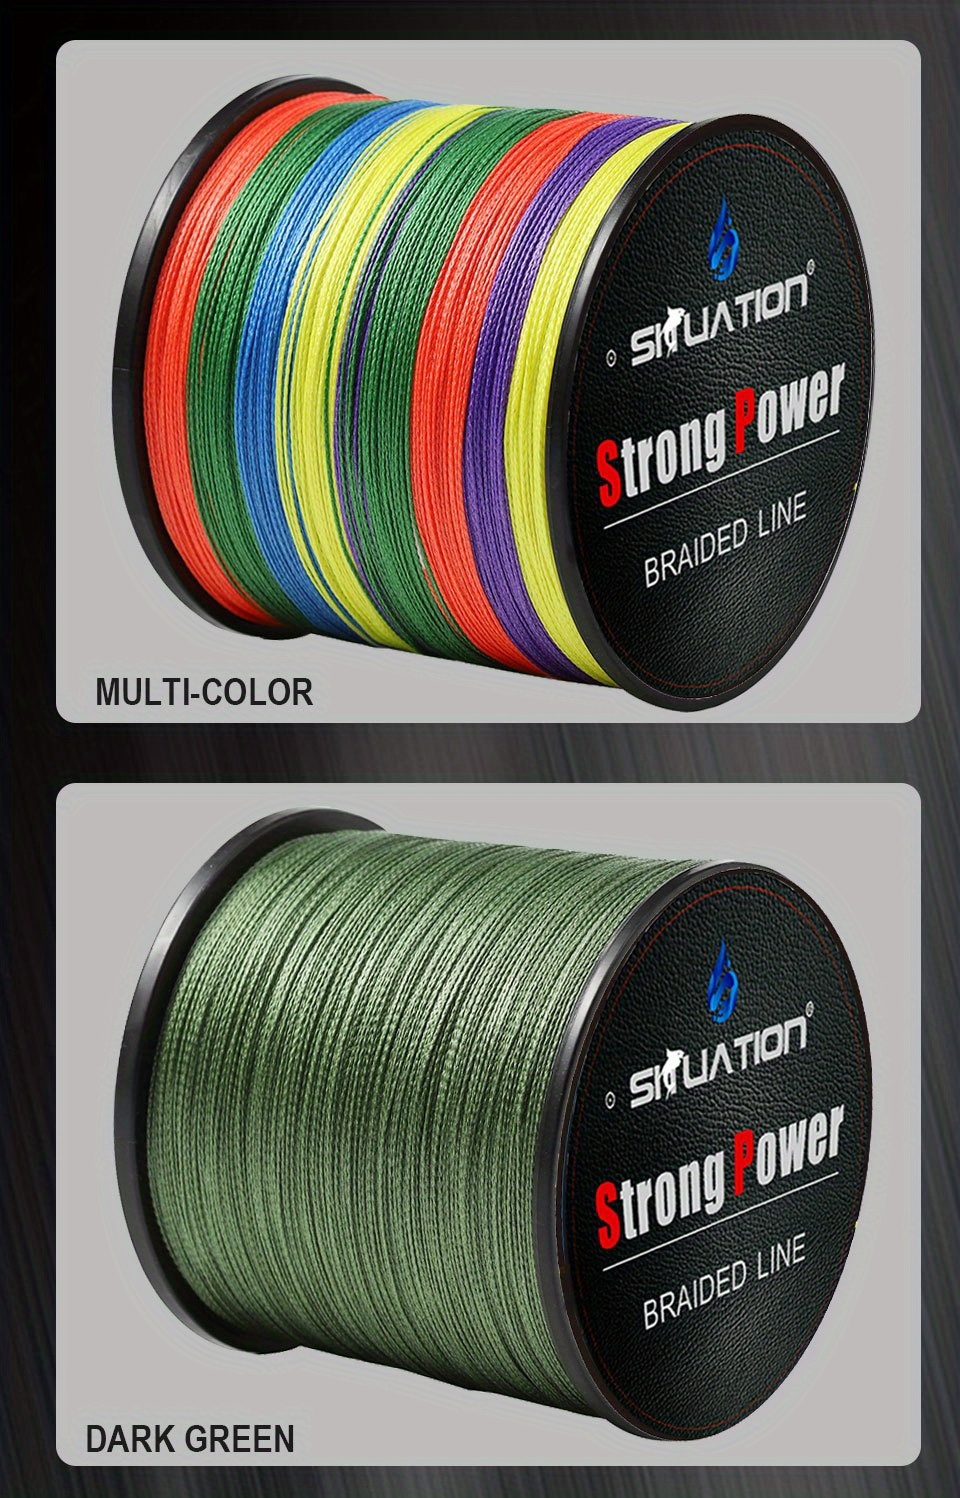 Super Strong Fishing Line - 500m/1640ft 4-Strand Multifilament PE